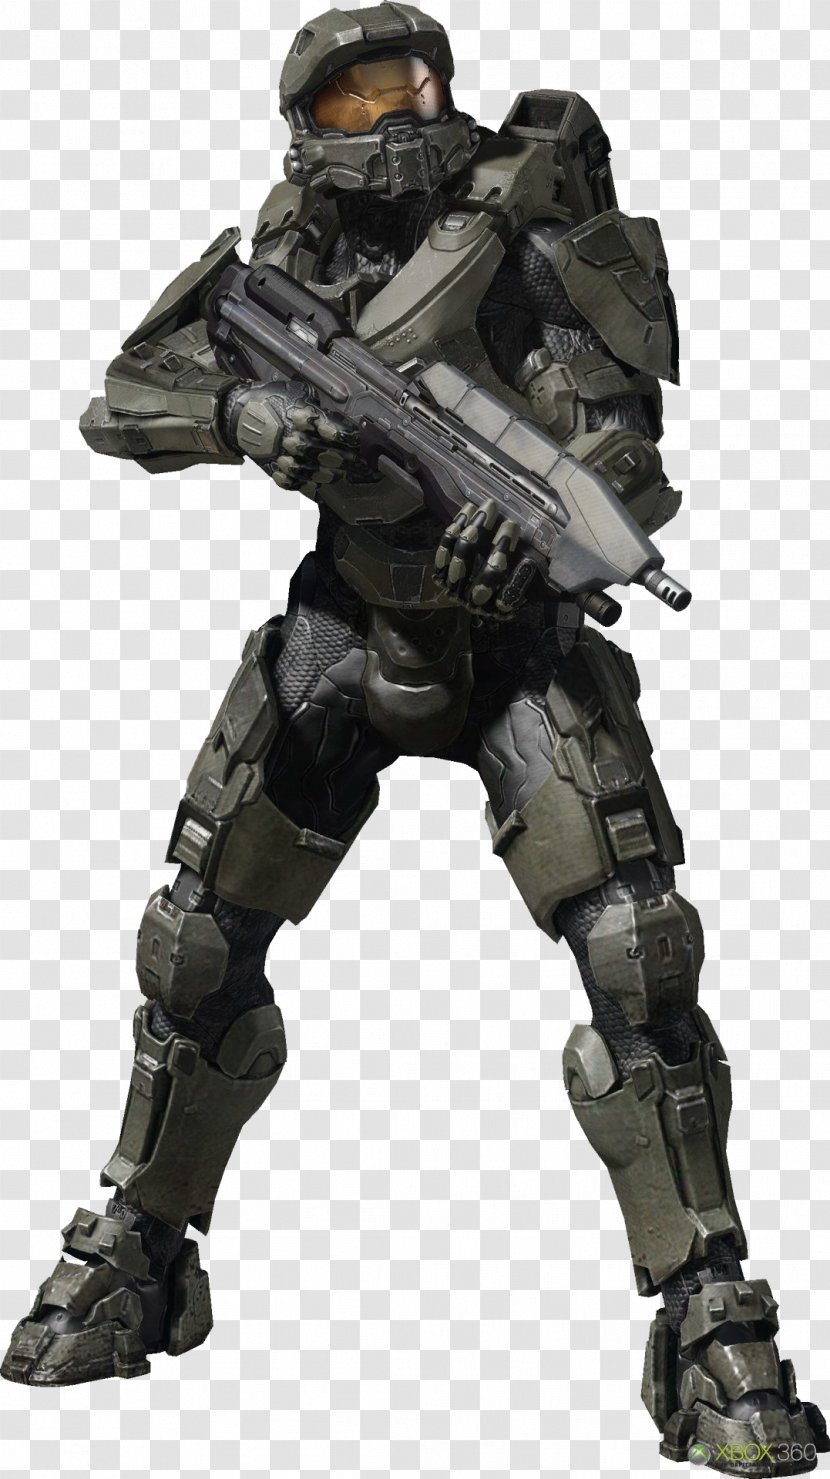 Halo: The Master Chief Collection Halo 4 5: Guardians 3: ODST 2 - Figurine - Wars Transparent PNG